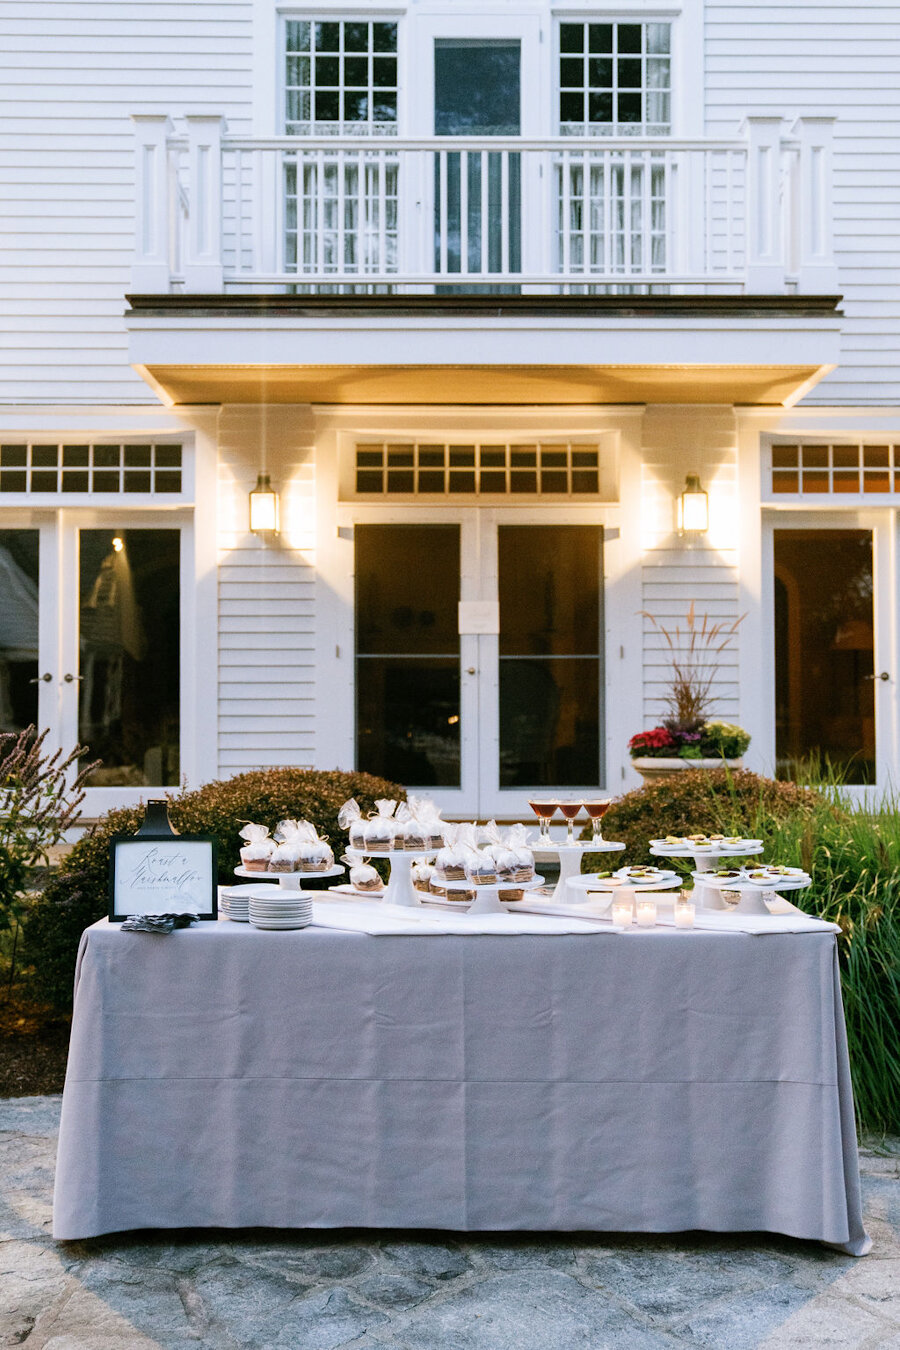 micro wedding s'mores station